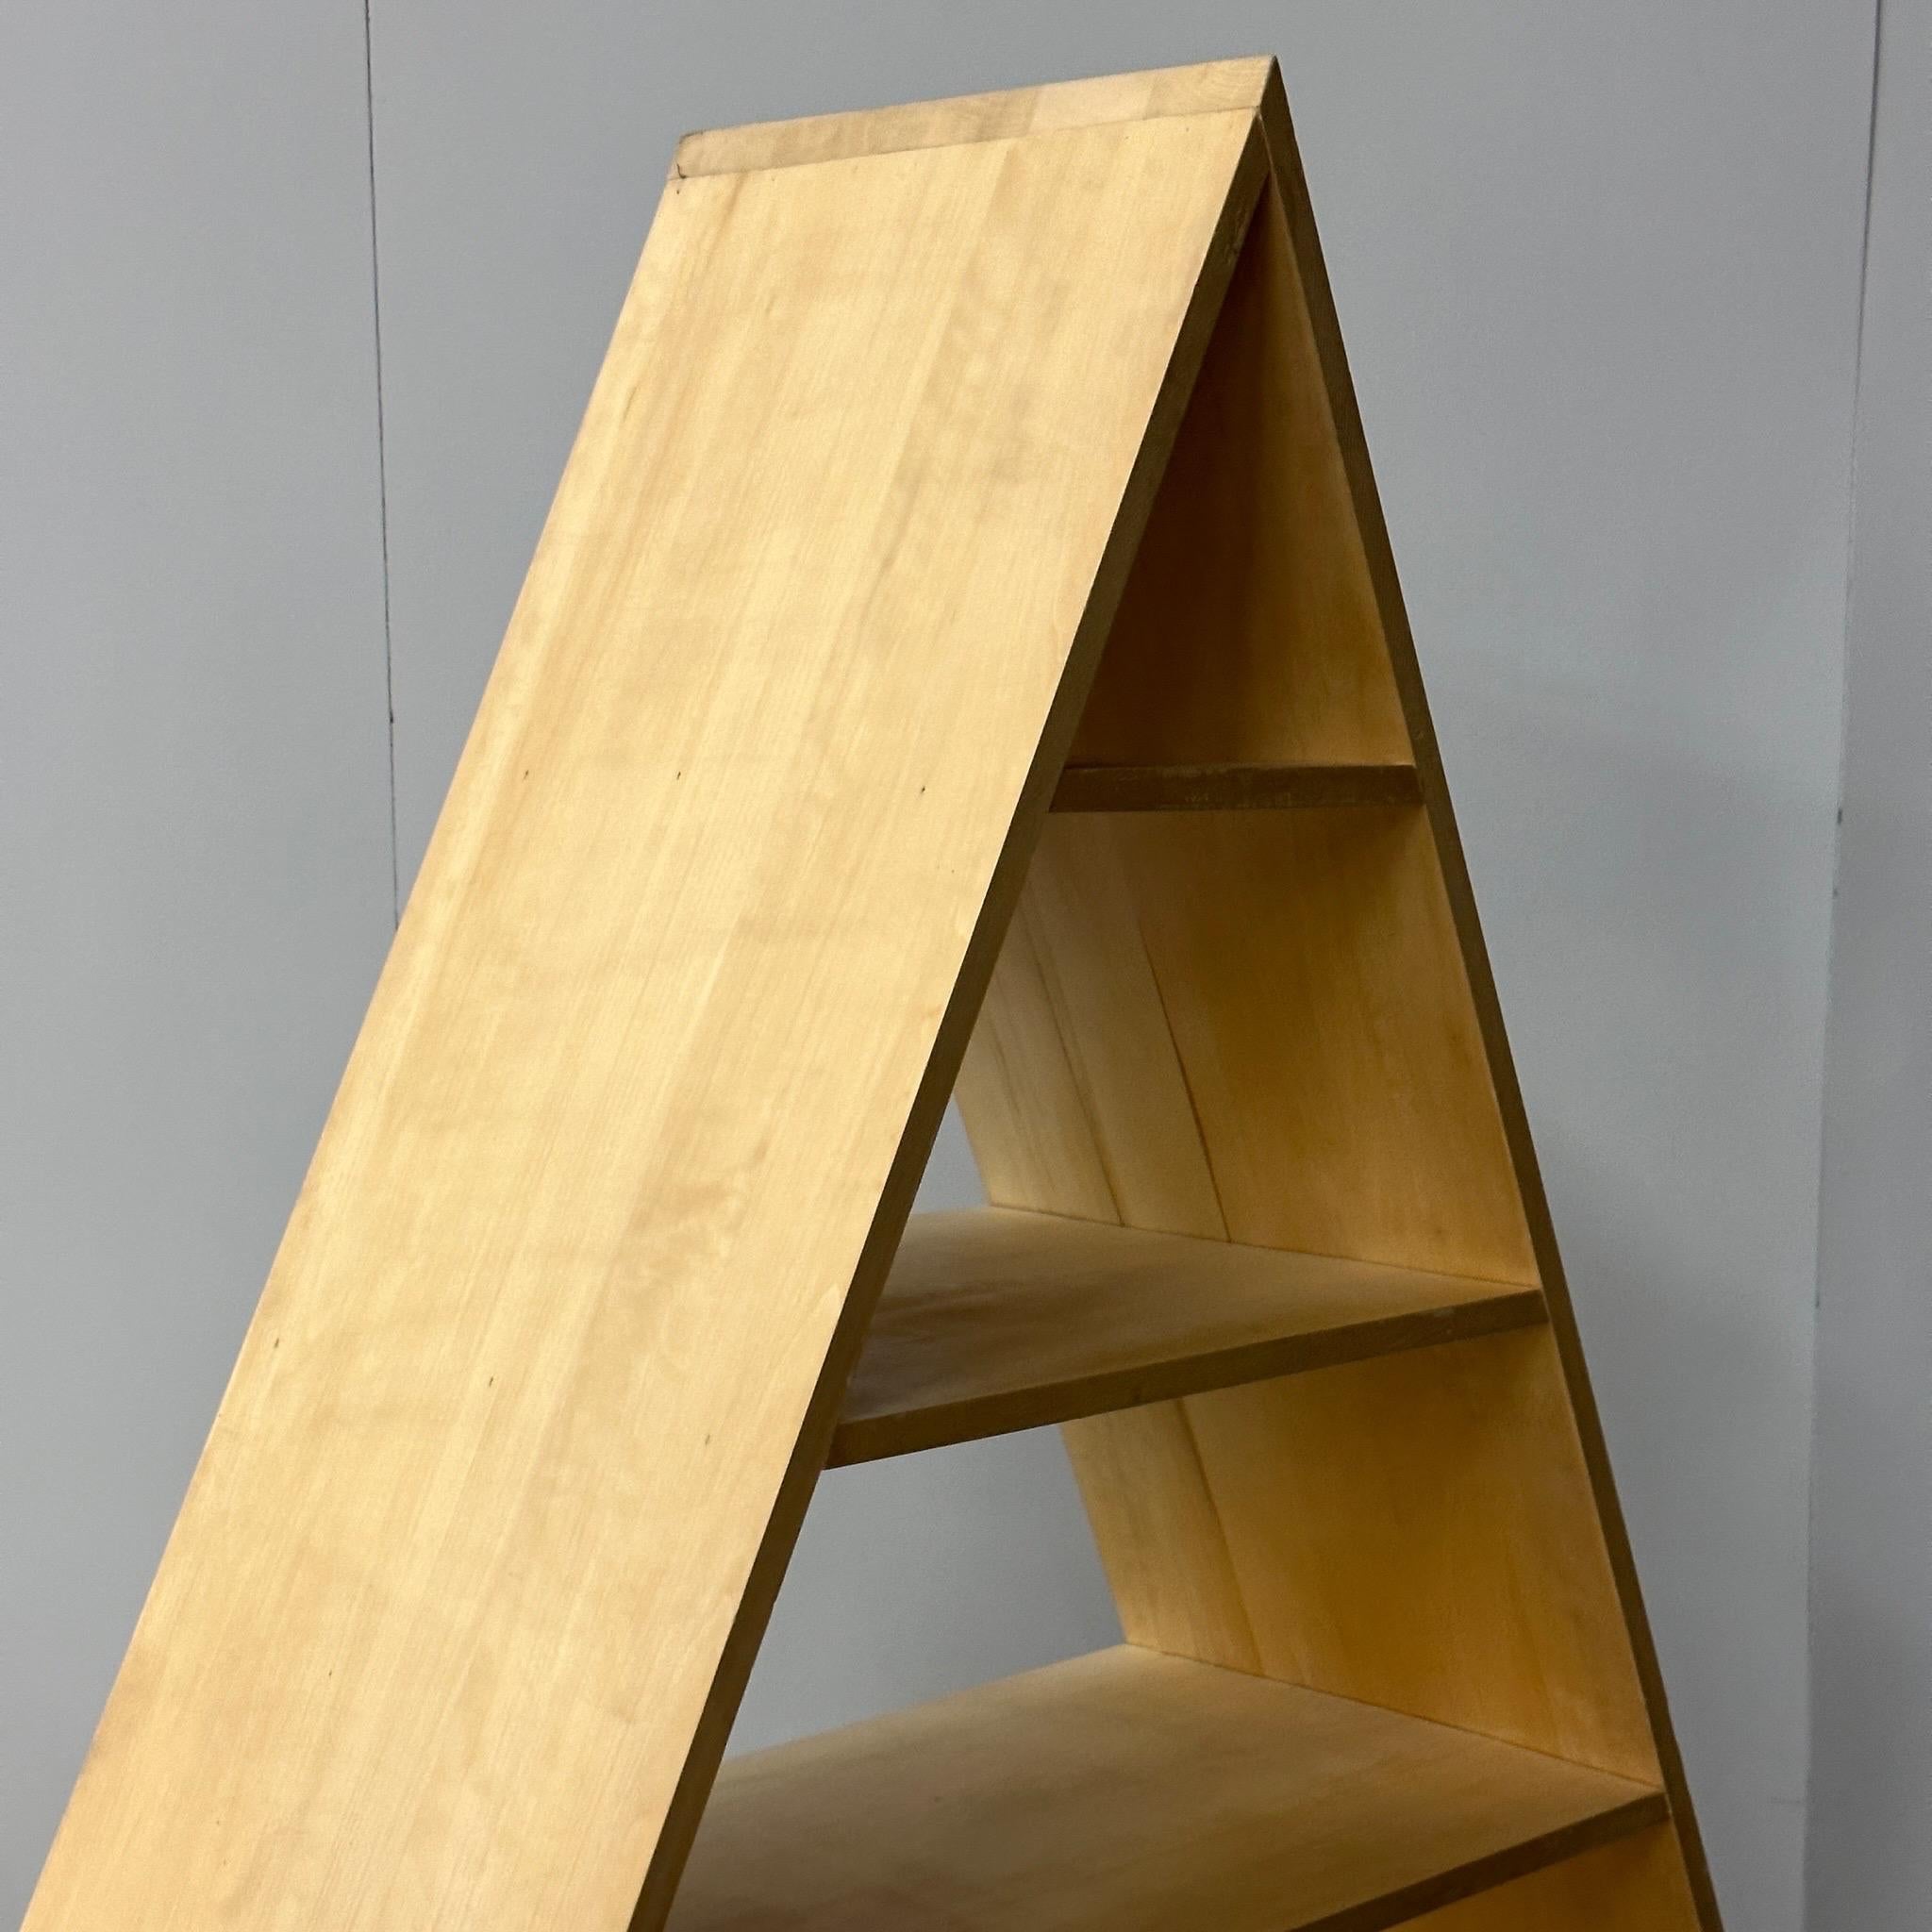 Handmade shelves constructed of birch plywood. Each opening has a 9.75” shelf height.

Price is for the set. Contact us if you'd like to purchase a single item.